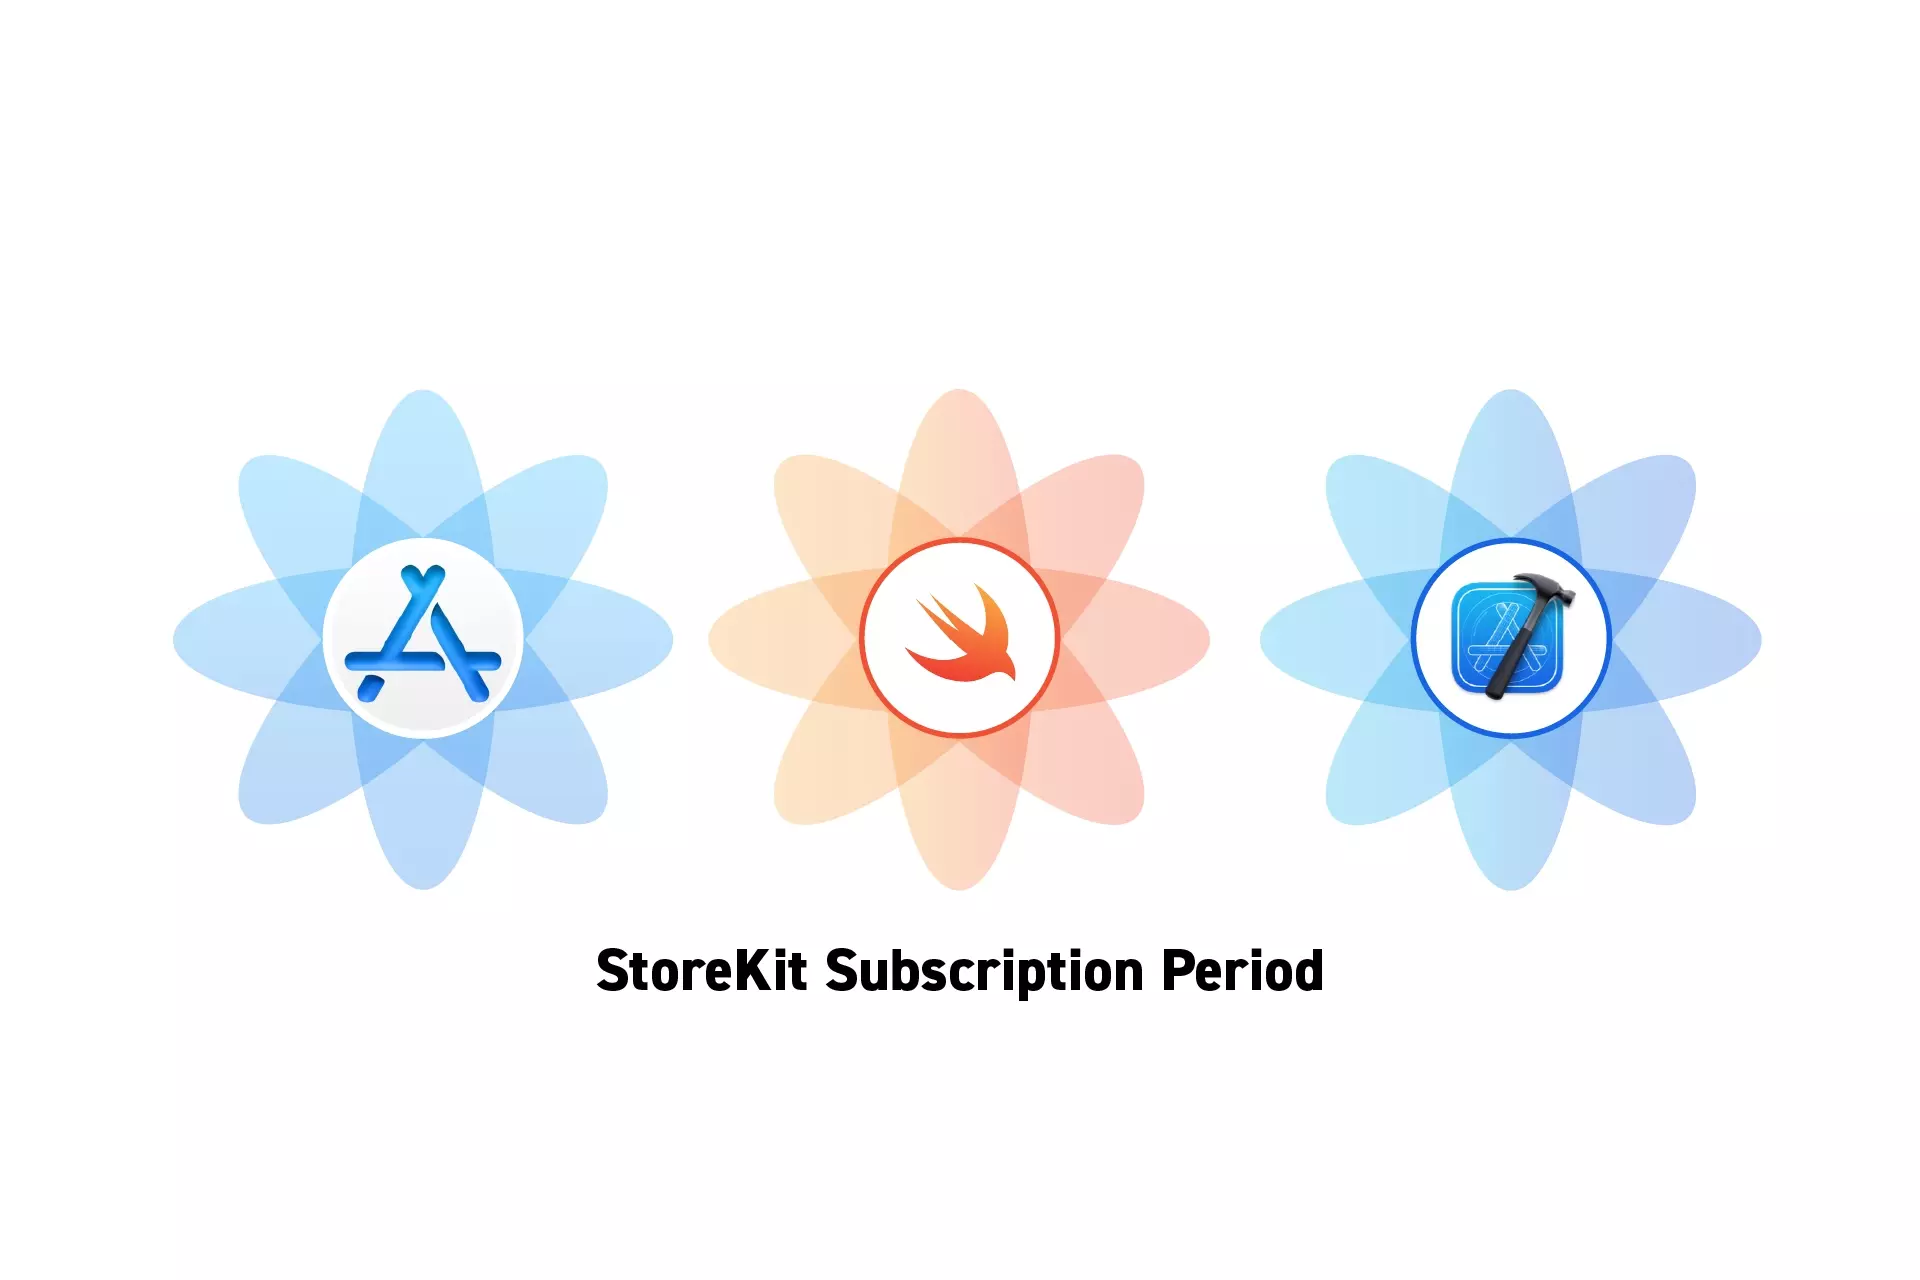 Three flowers that represent StoreKit, Swift and XCode side by side. Beneath them sits the text “.”